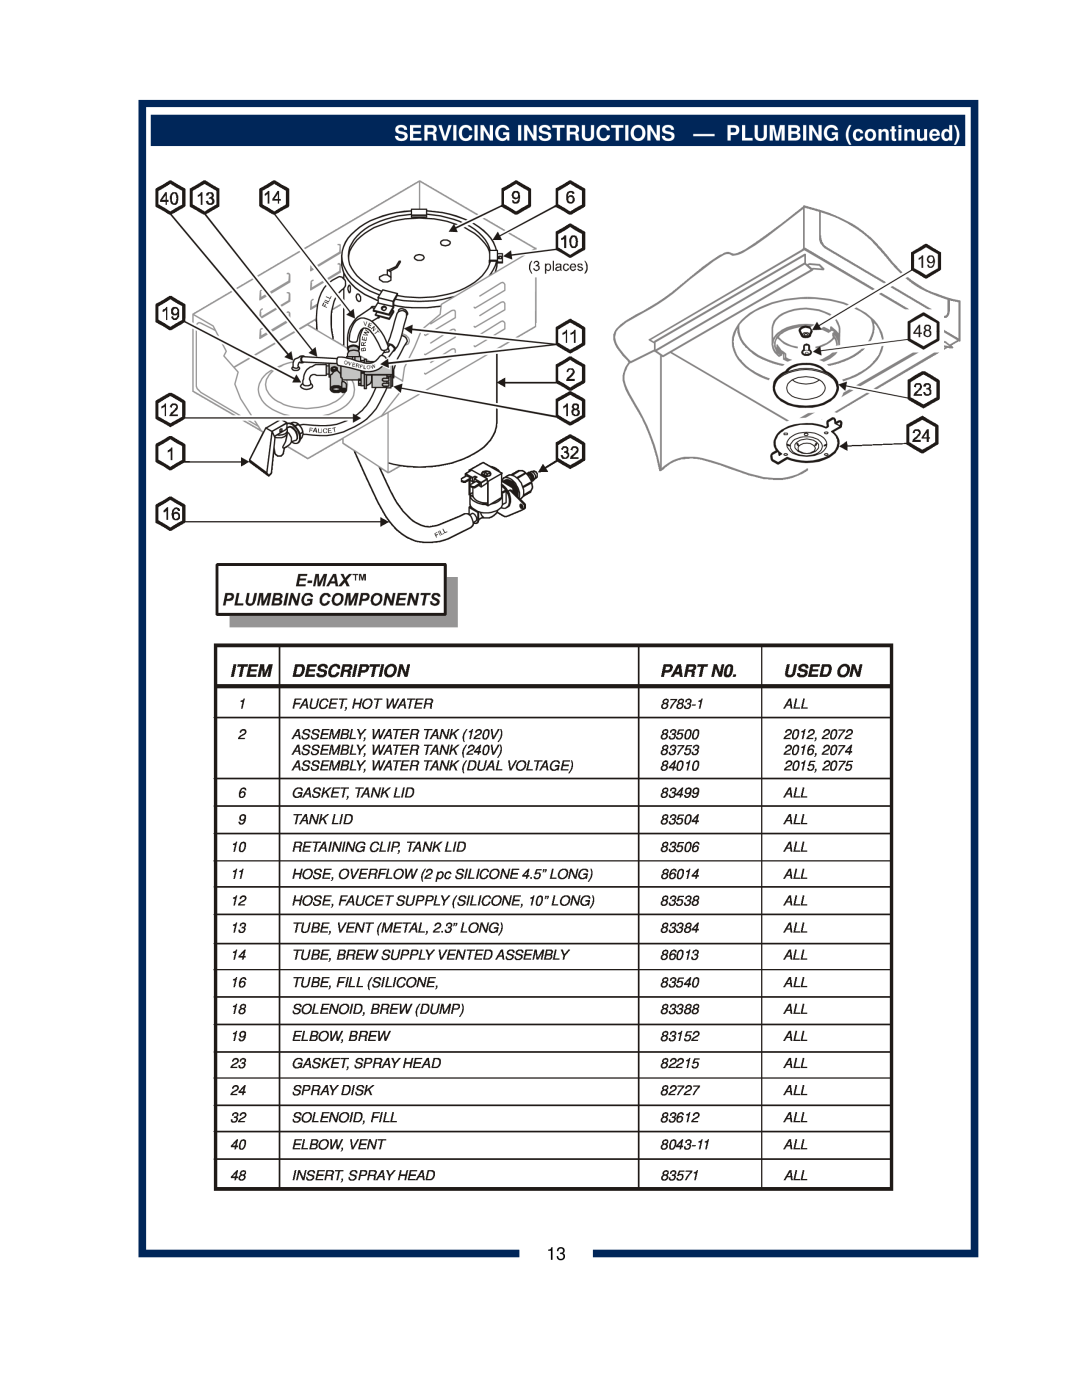 Bloomfield 2016EX, 2074L, 2072FRL, 2012, 2074FRL SERVICING INSTRUCTIONS - PLUMBING continued, Description, PART N0, Used On 